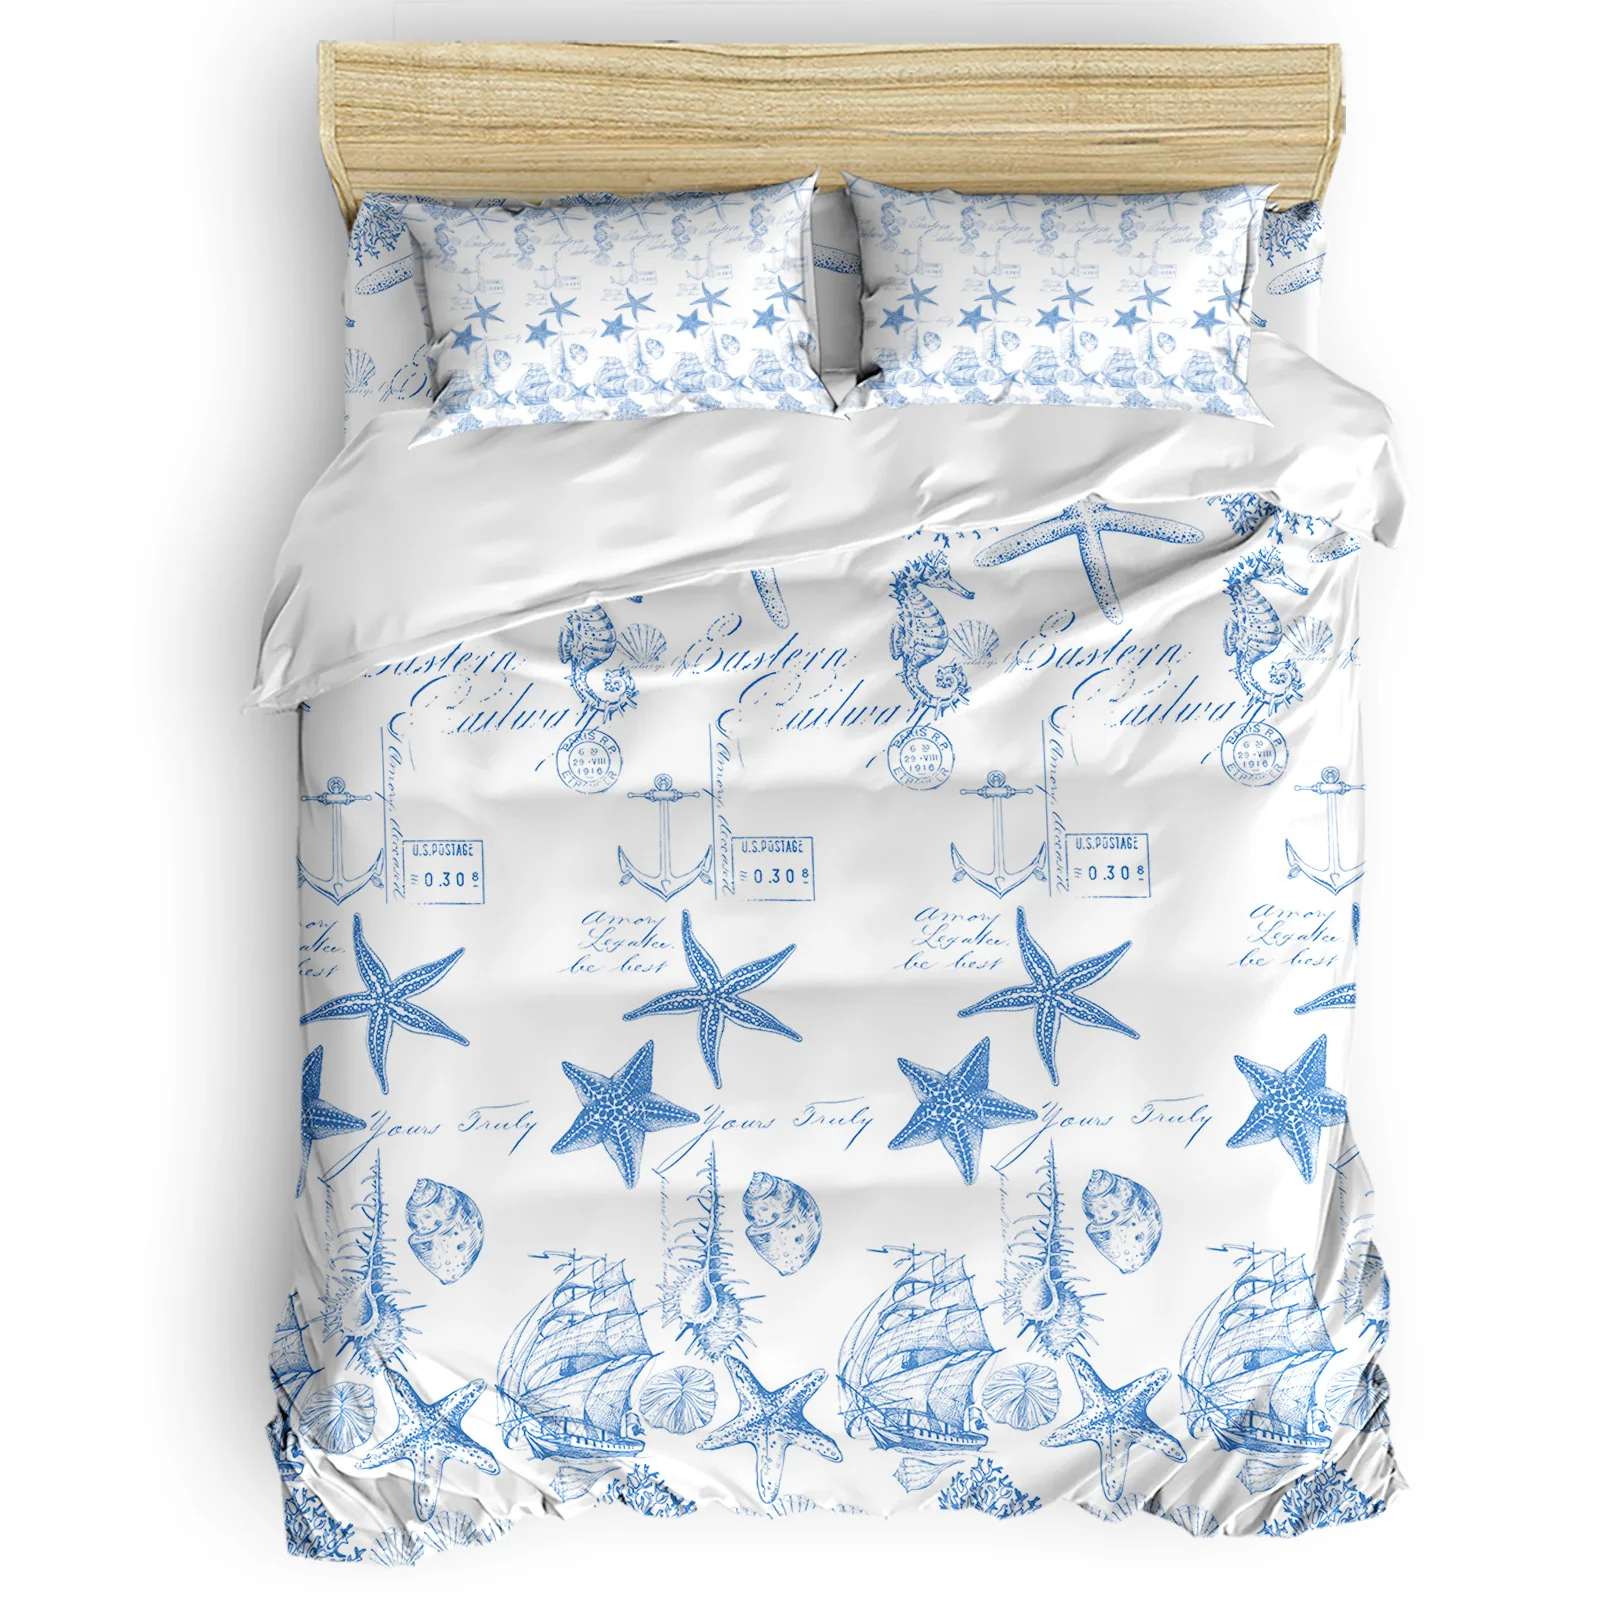 

Blue Ocean Starfish Shell Coral Vessel Texture Comfortable Household Goods Bedroom Bed Luxury Duvet Cover 2/3/4 Pieces